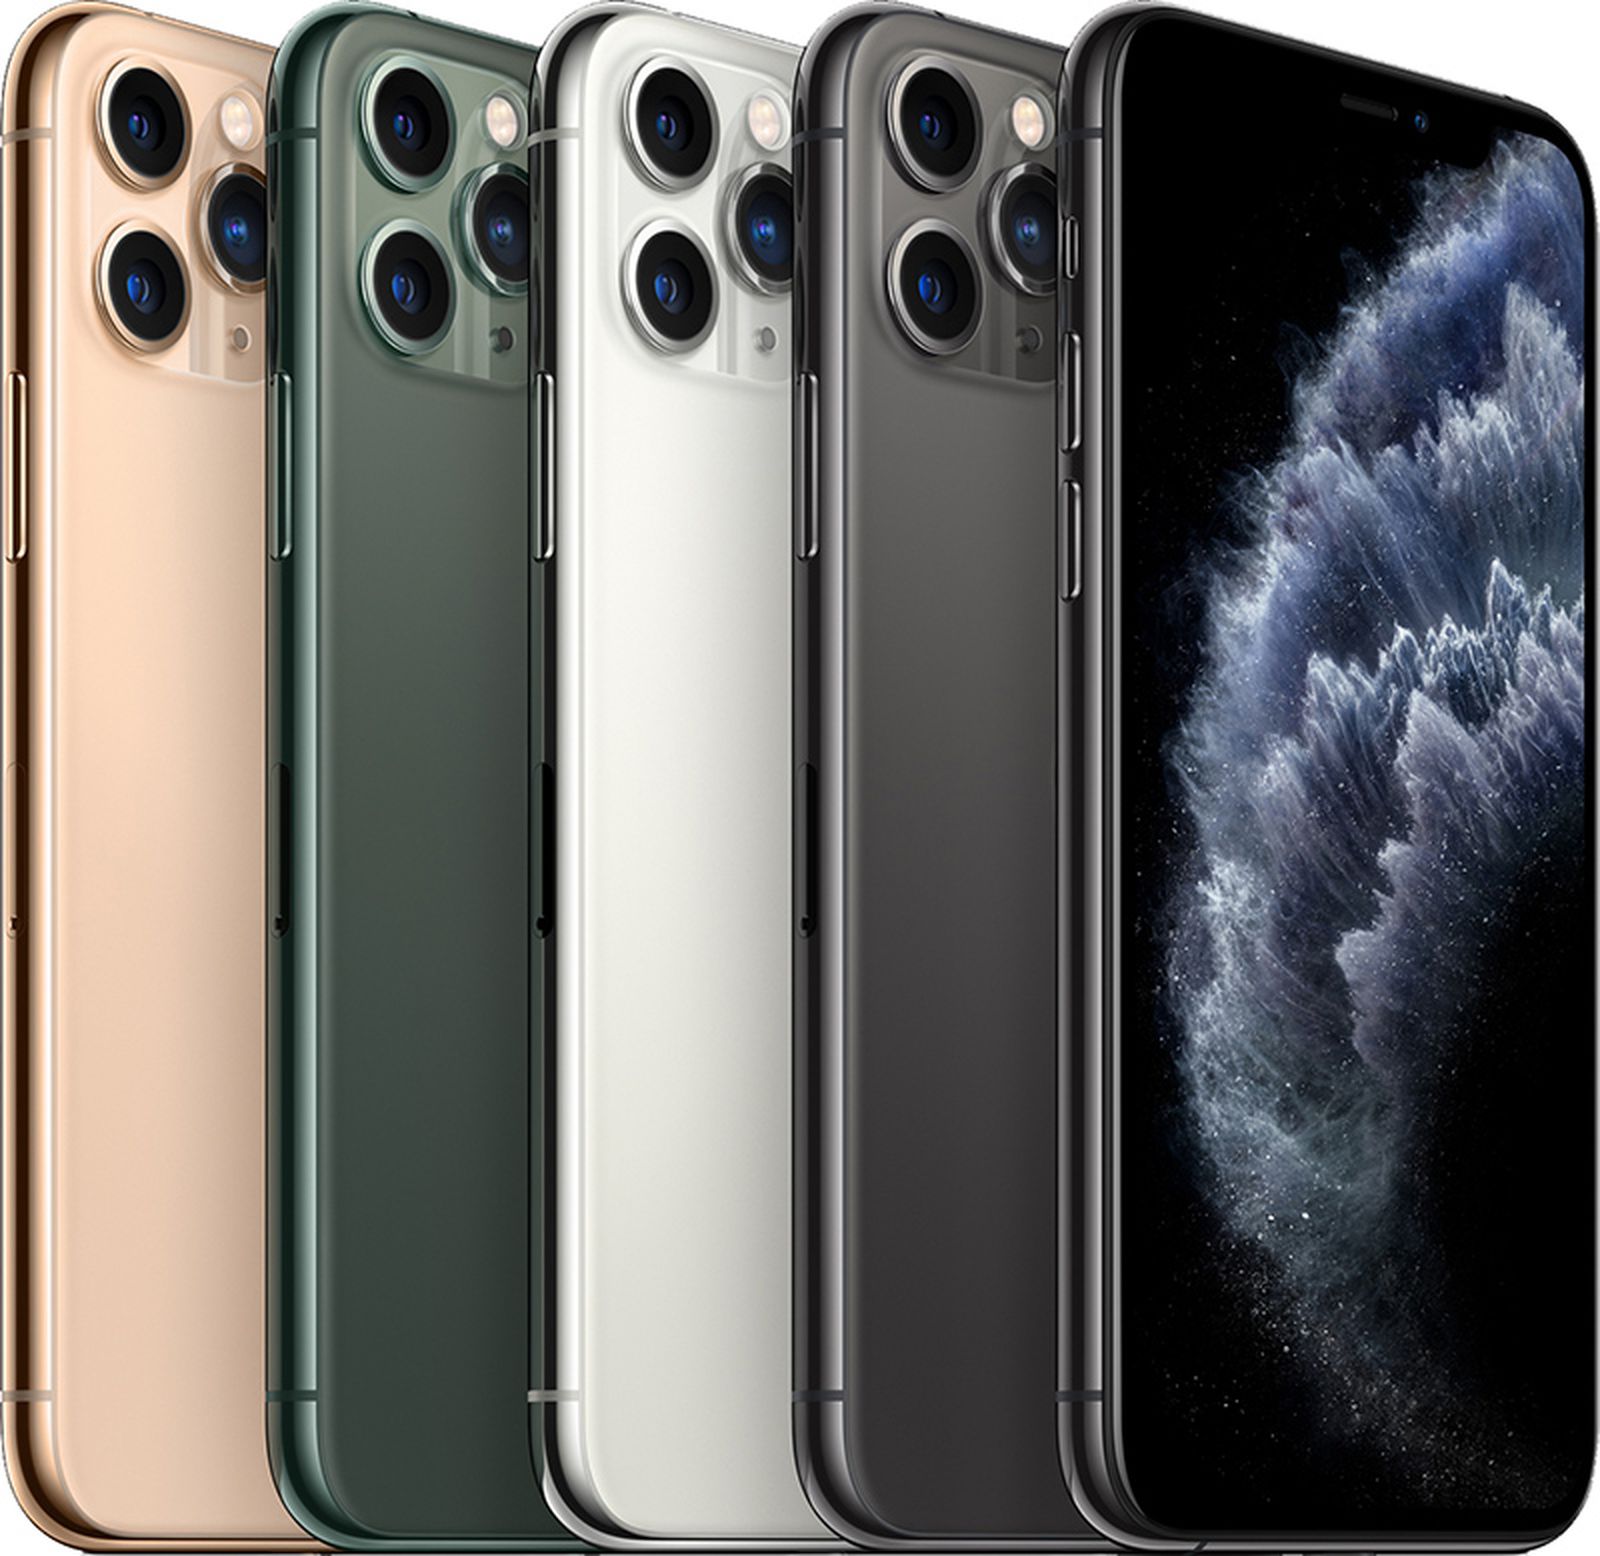 IPhone 11 Release Date: Identifying The Launch Date Of IPhone 11